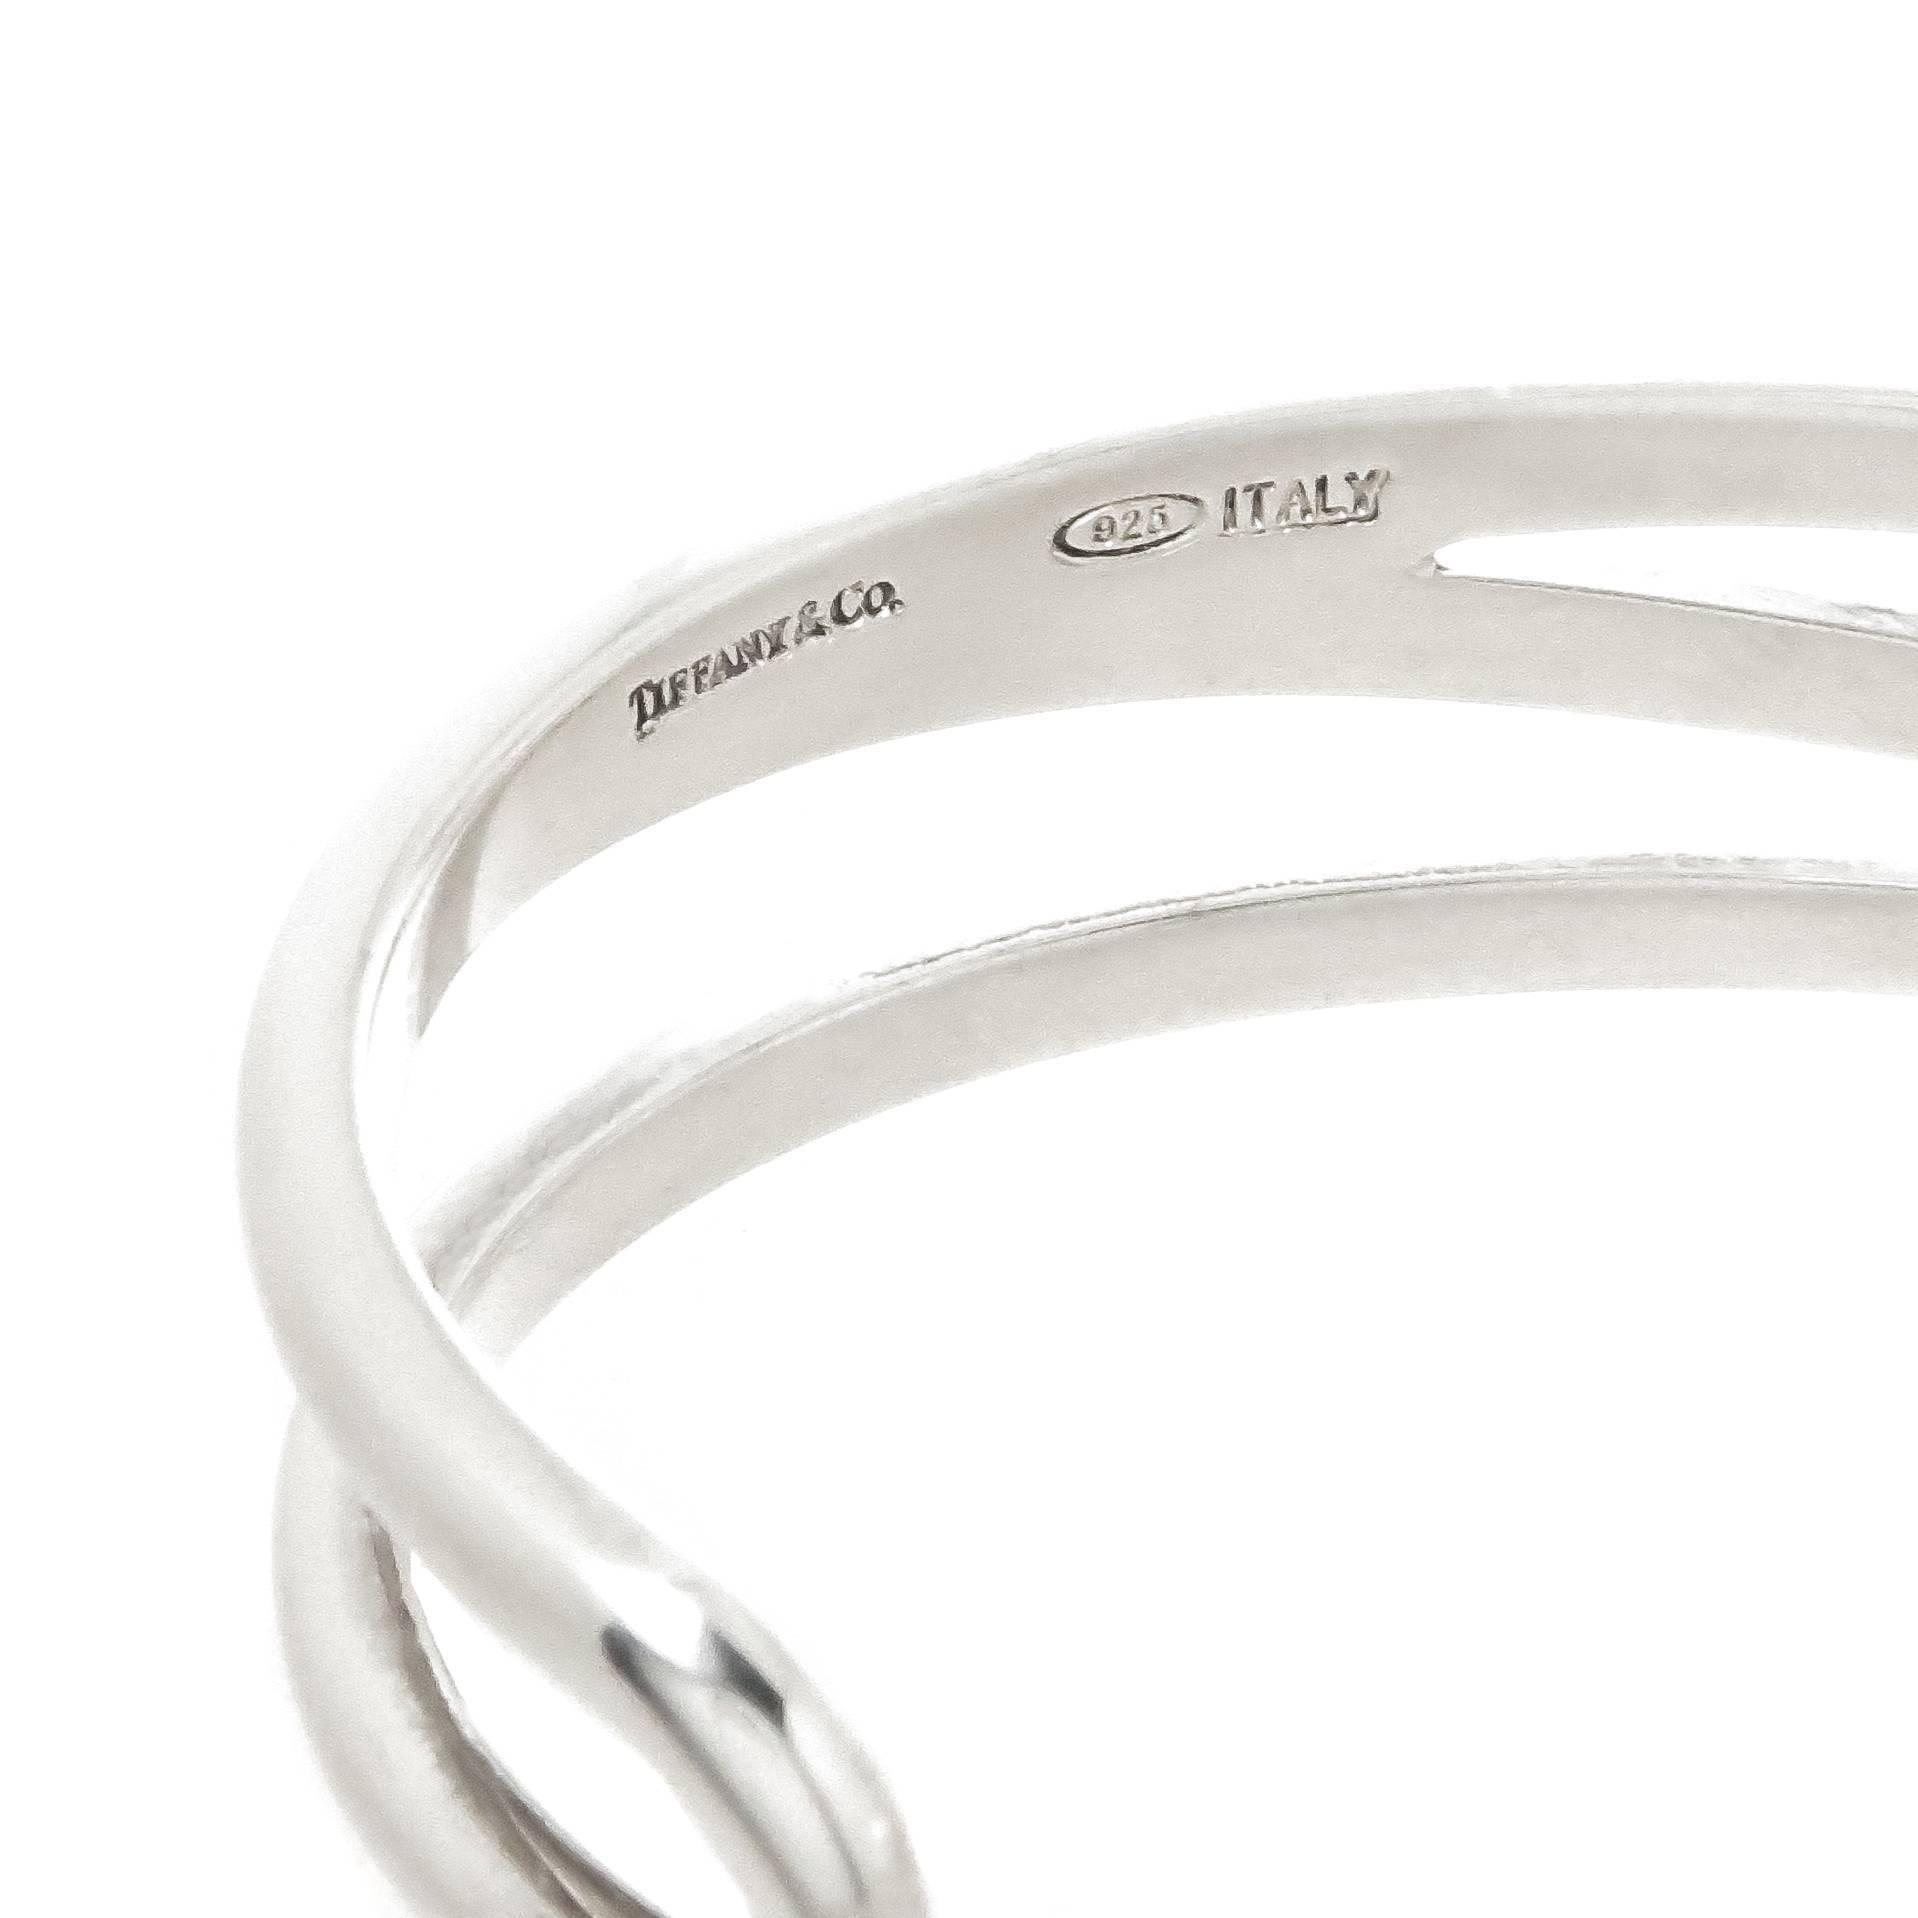 Circa 2000 Tiffany & Company Sterling Silver Cuff Bracelet, measuring 5/8 inch wide with an inside measurement of approximately 6 1/2 inches with an opening of 1 3/8 inches and can be squeezed a bit to make it smaller or larger if needed.  